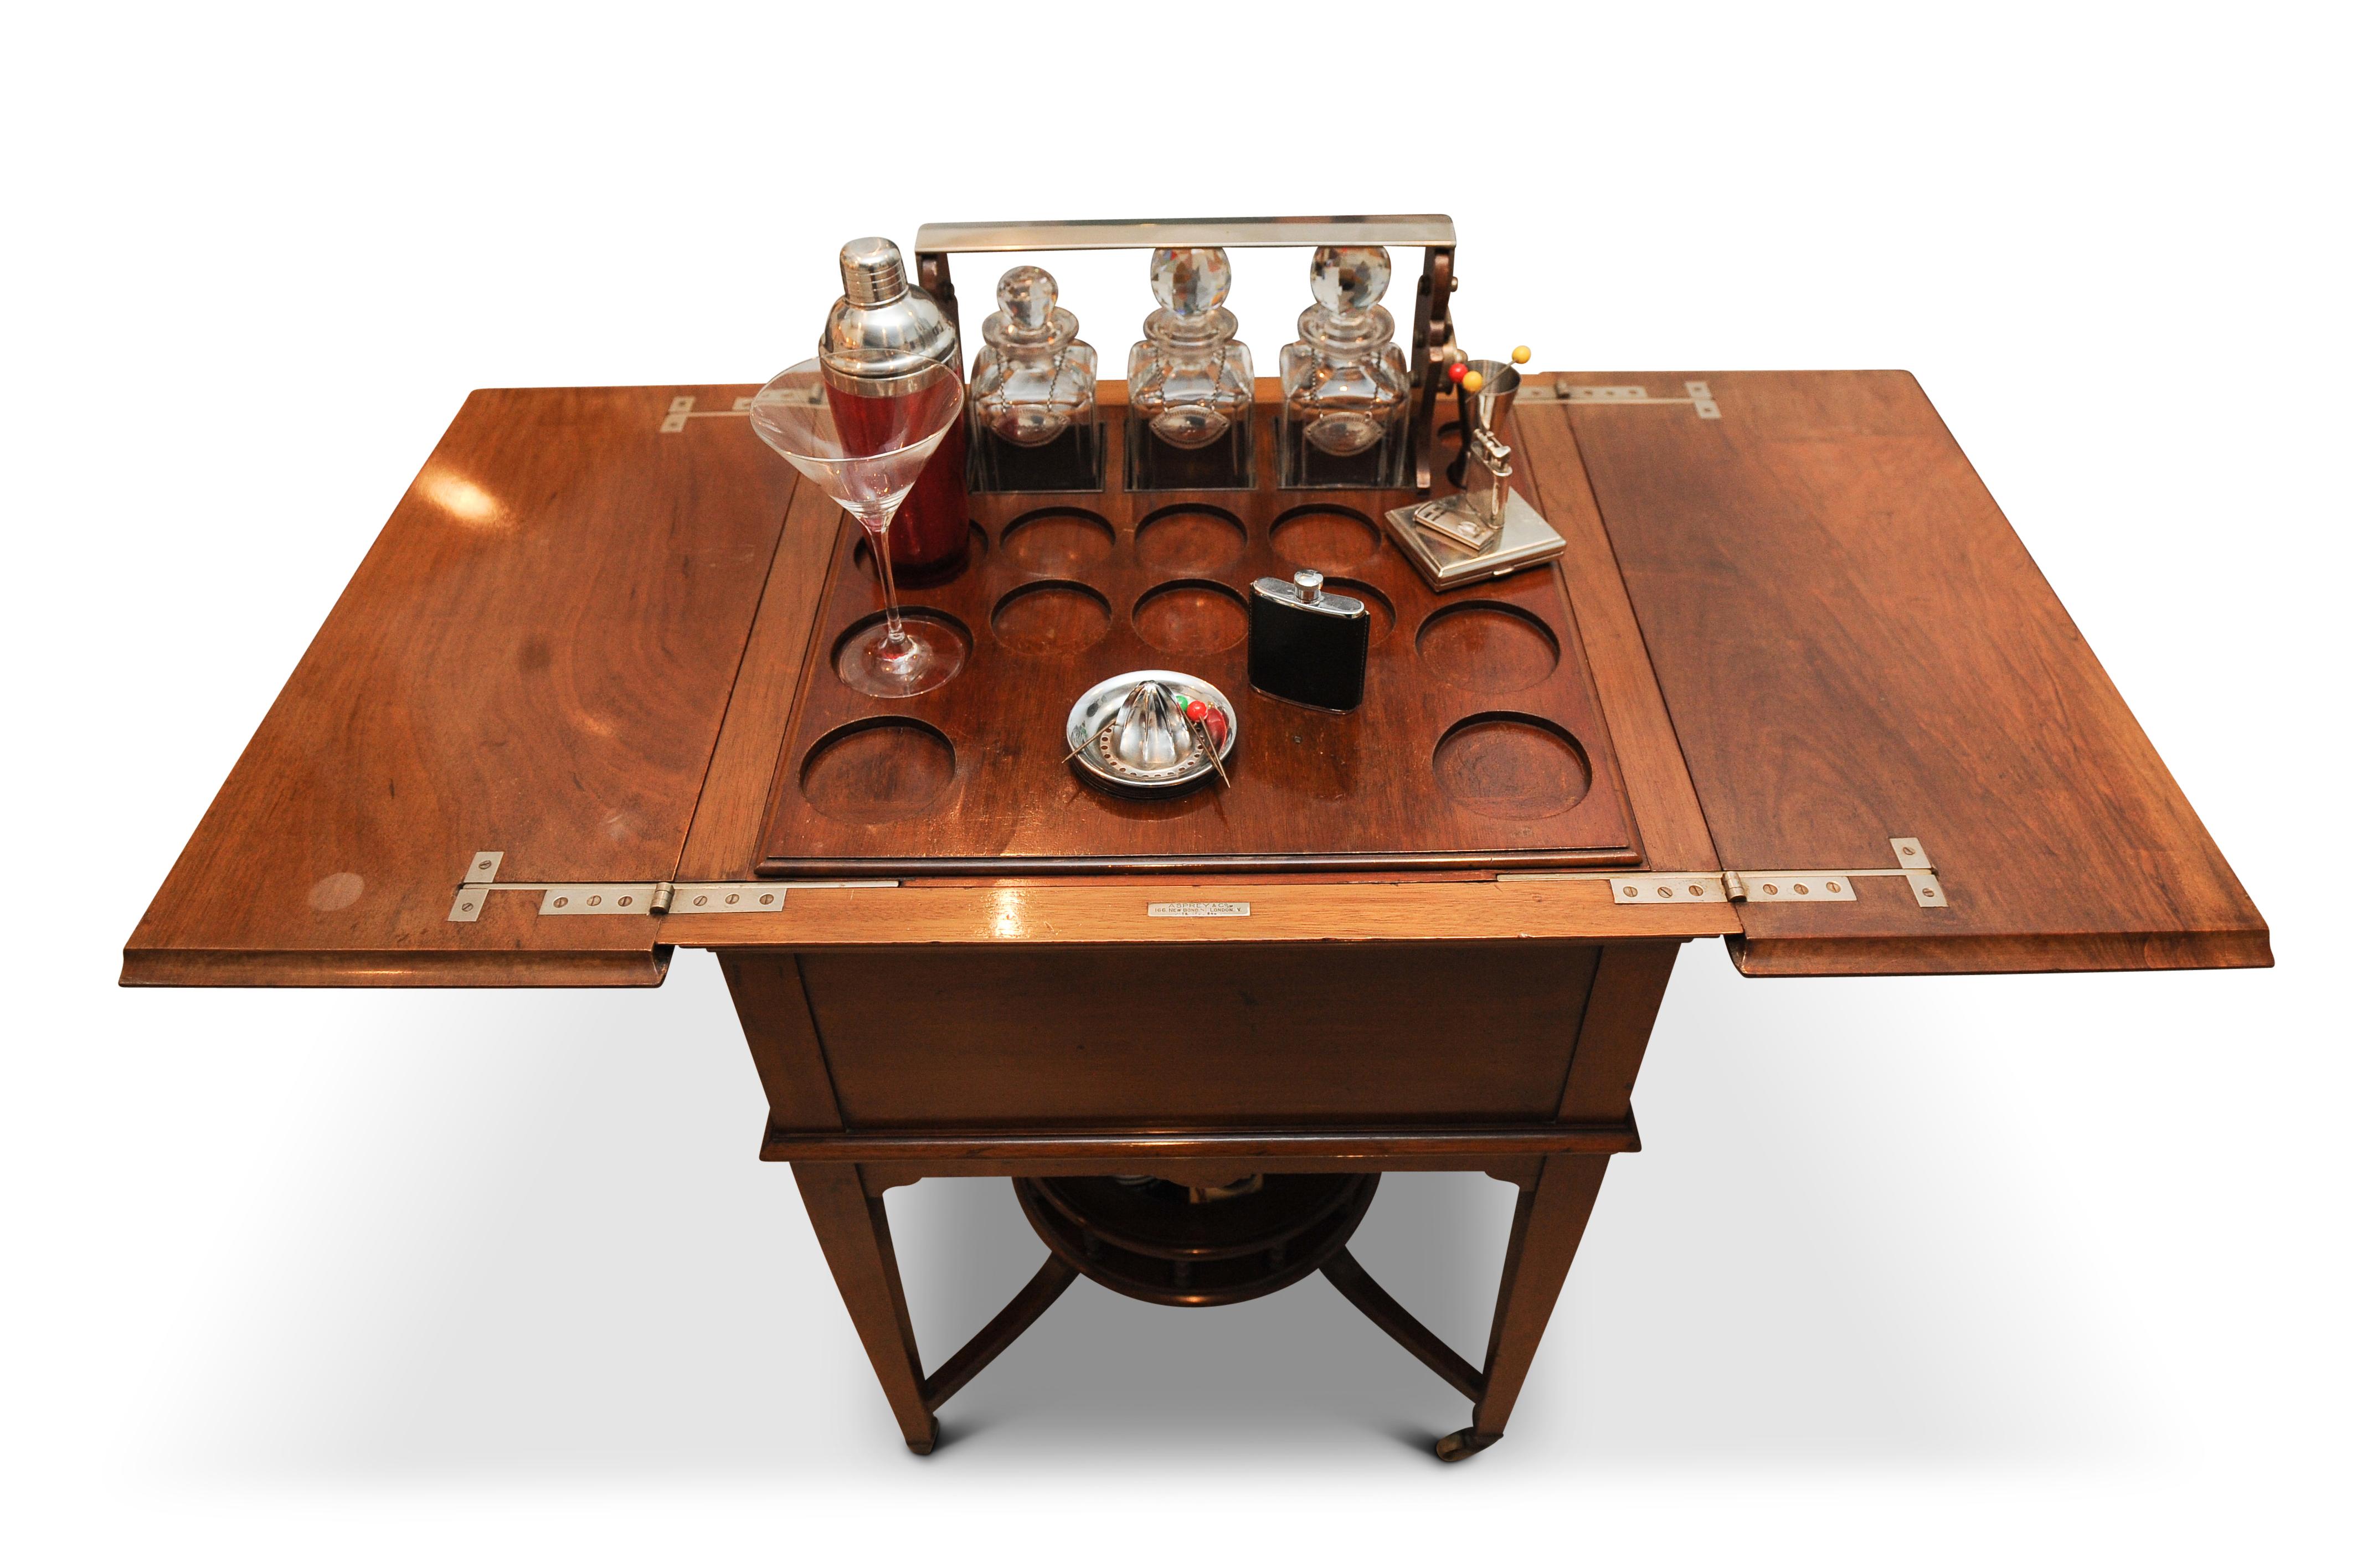 Hand-Crafted Asprey & Co. London 1920s Mahogany Pop Up Dry Bar Drinks Cabinet and Decanters